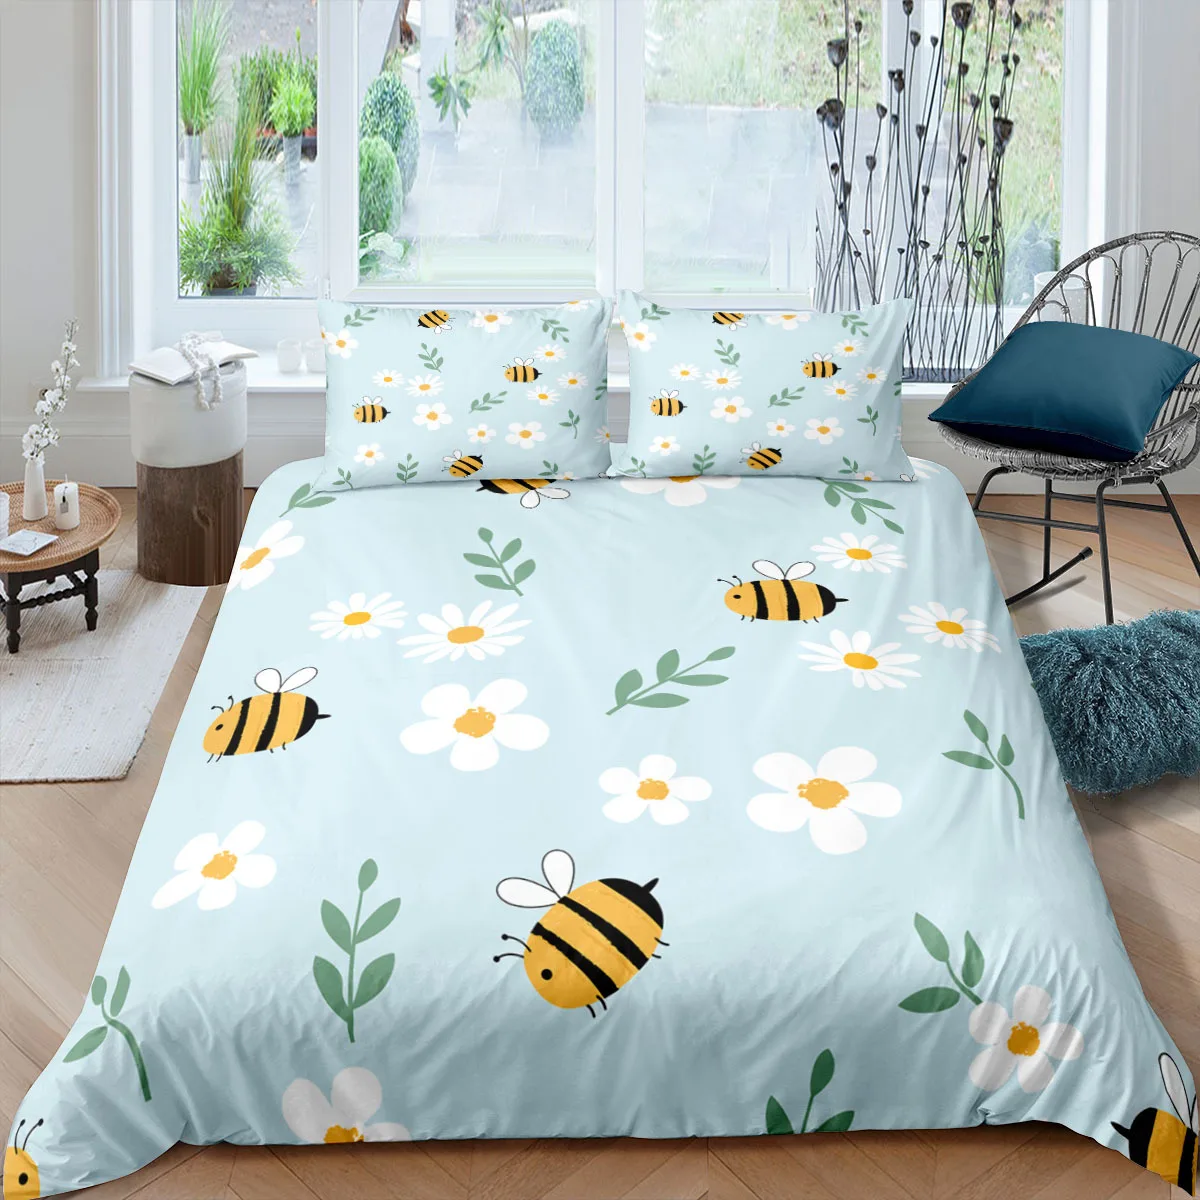 Dustproof Bed Cover Soft Bed Cover Details about  / 2021 New Home Top Modern Bed Cover